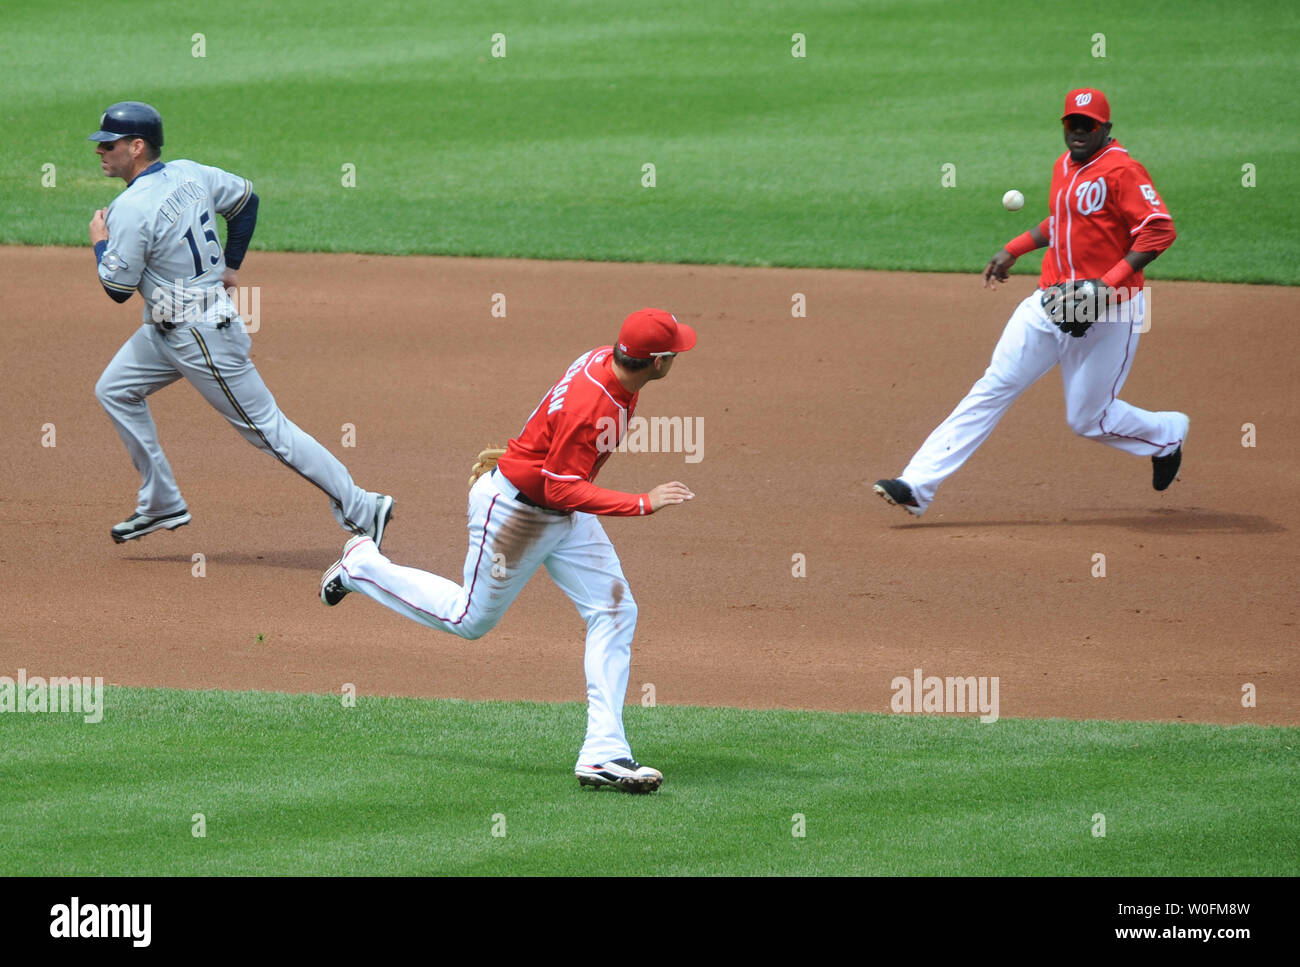 Washington Nationals third baseman Ryan Zimmerman (C) and shortstop Cristian Guzman (R) miss a ground ball as Milwaukee Brewers Jim Edmonds runs to third, during the first inning at Nationals Park in Washington on April 18, 2010.  UPI/Kevin Dietsch Stock Photo